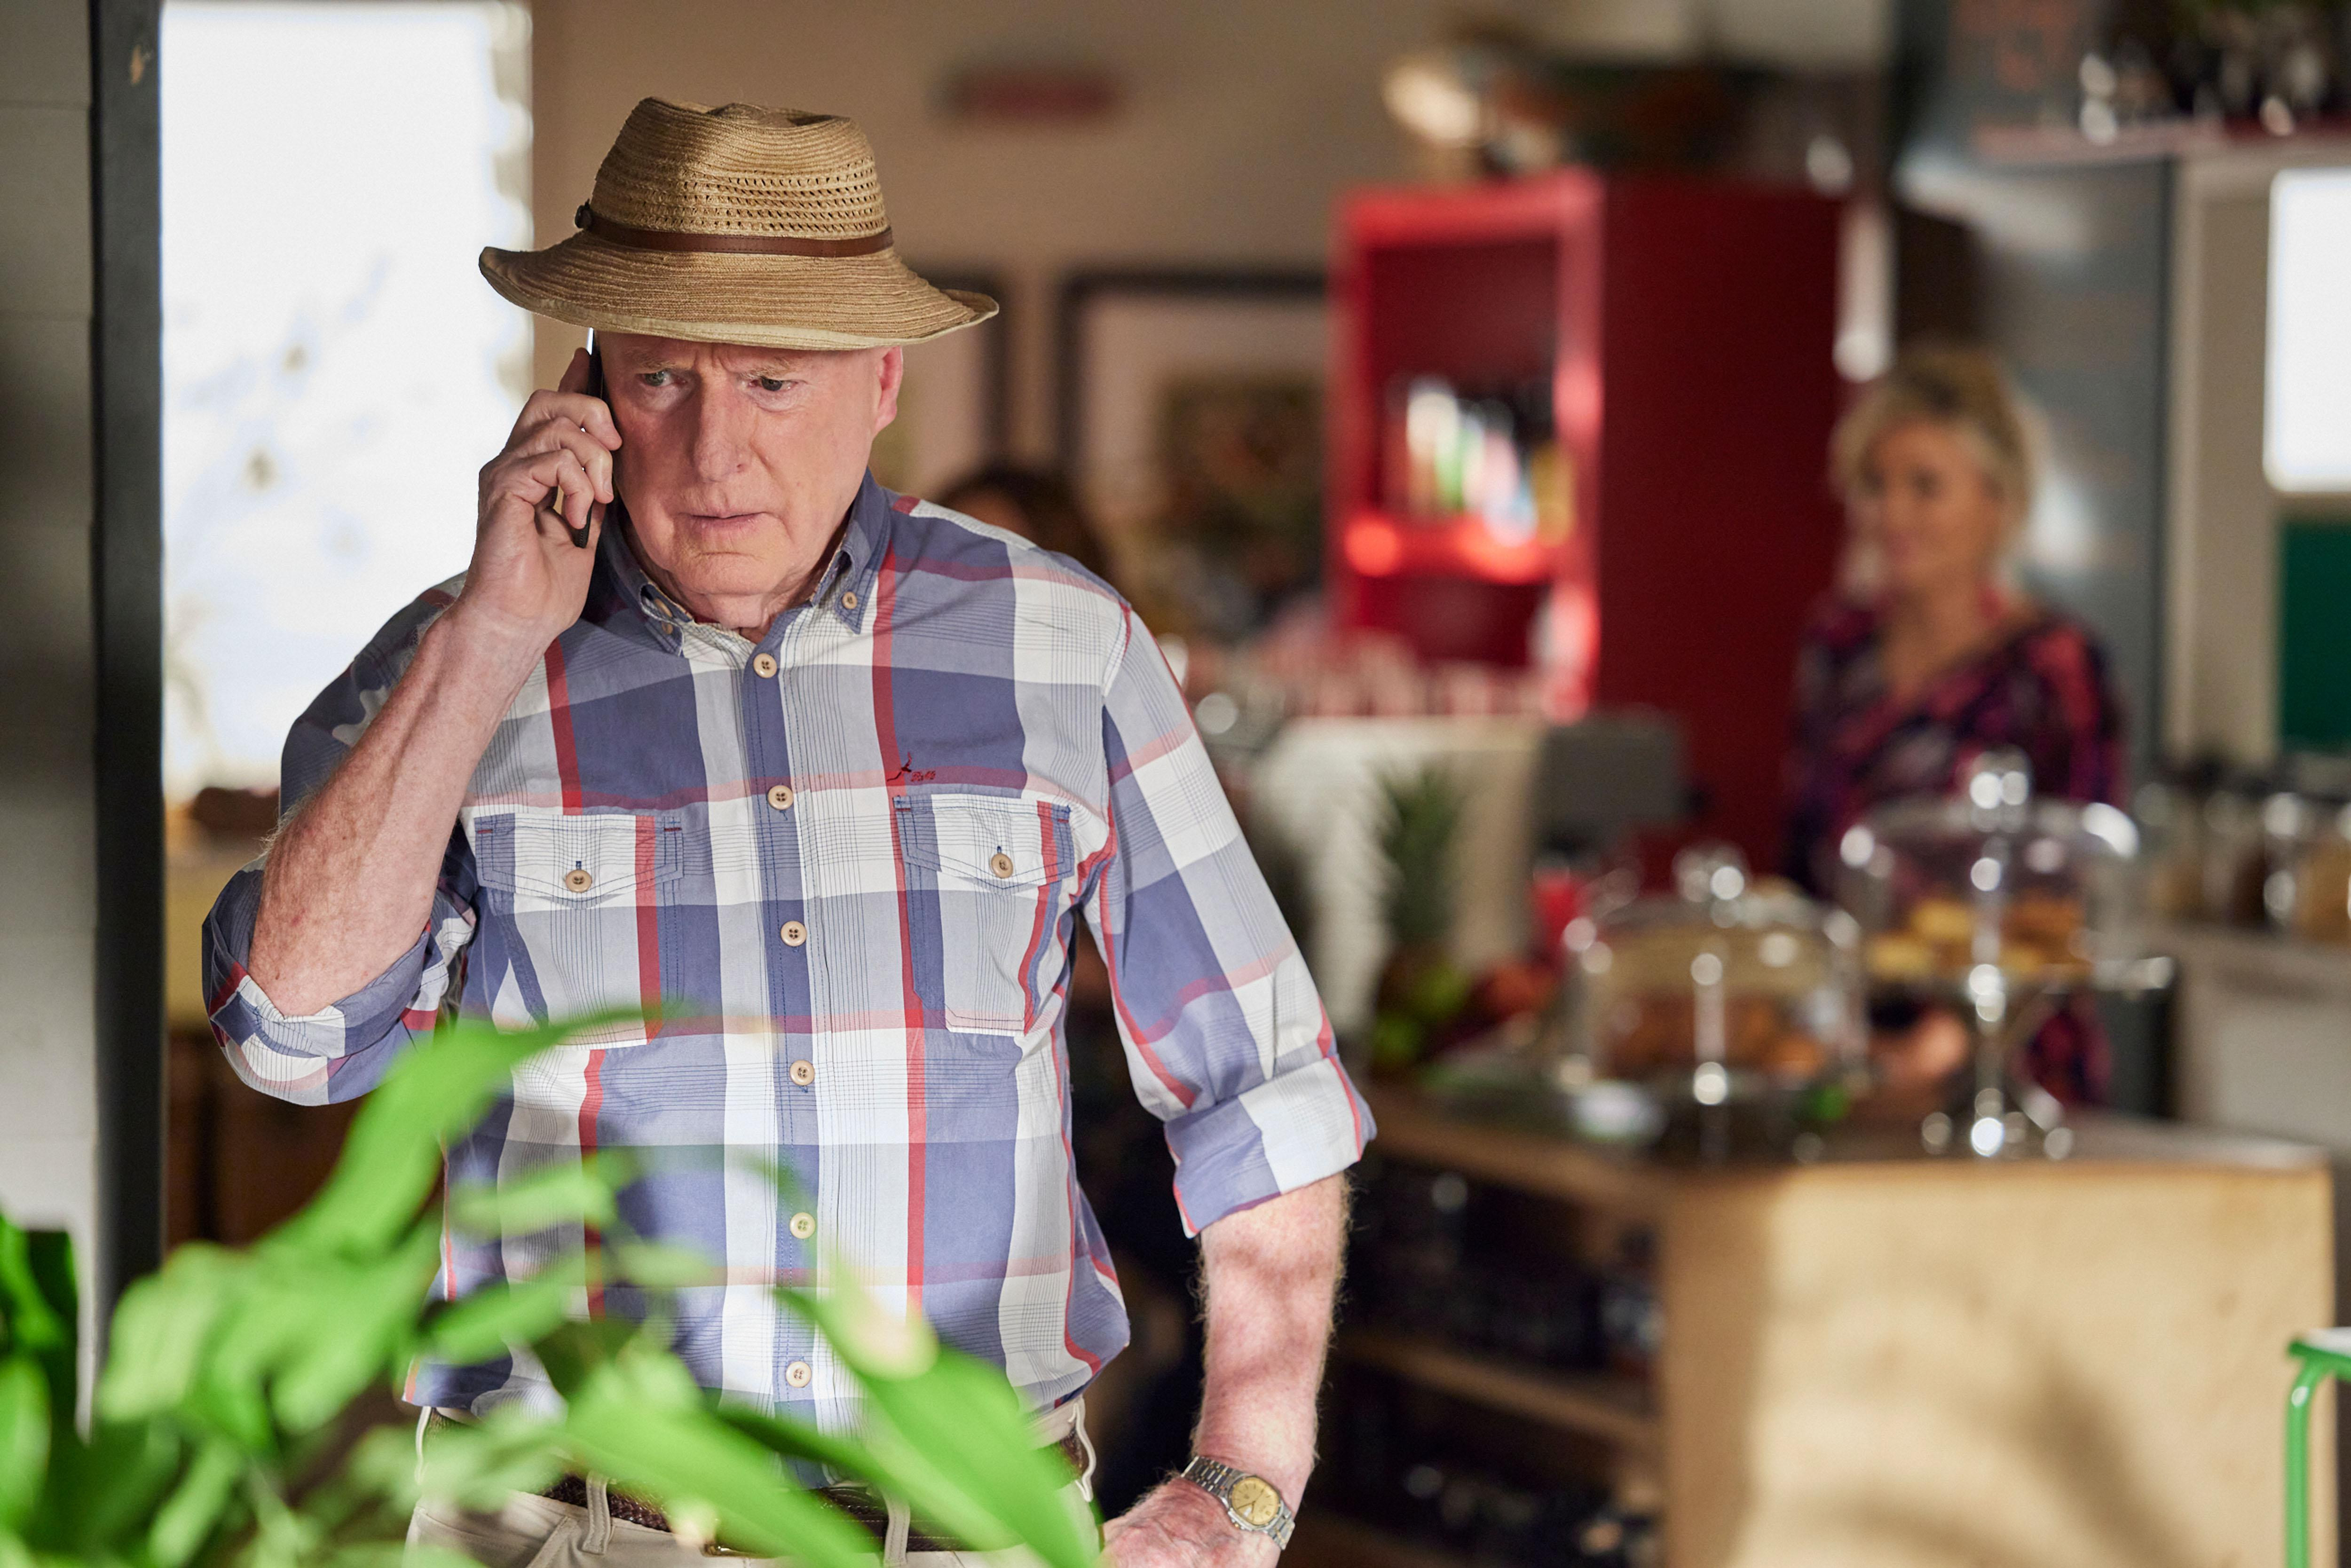 Home and Away spoilers: Alf’s health on the line after increasing work pressures?